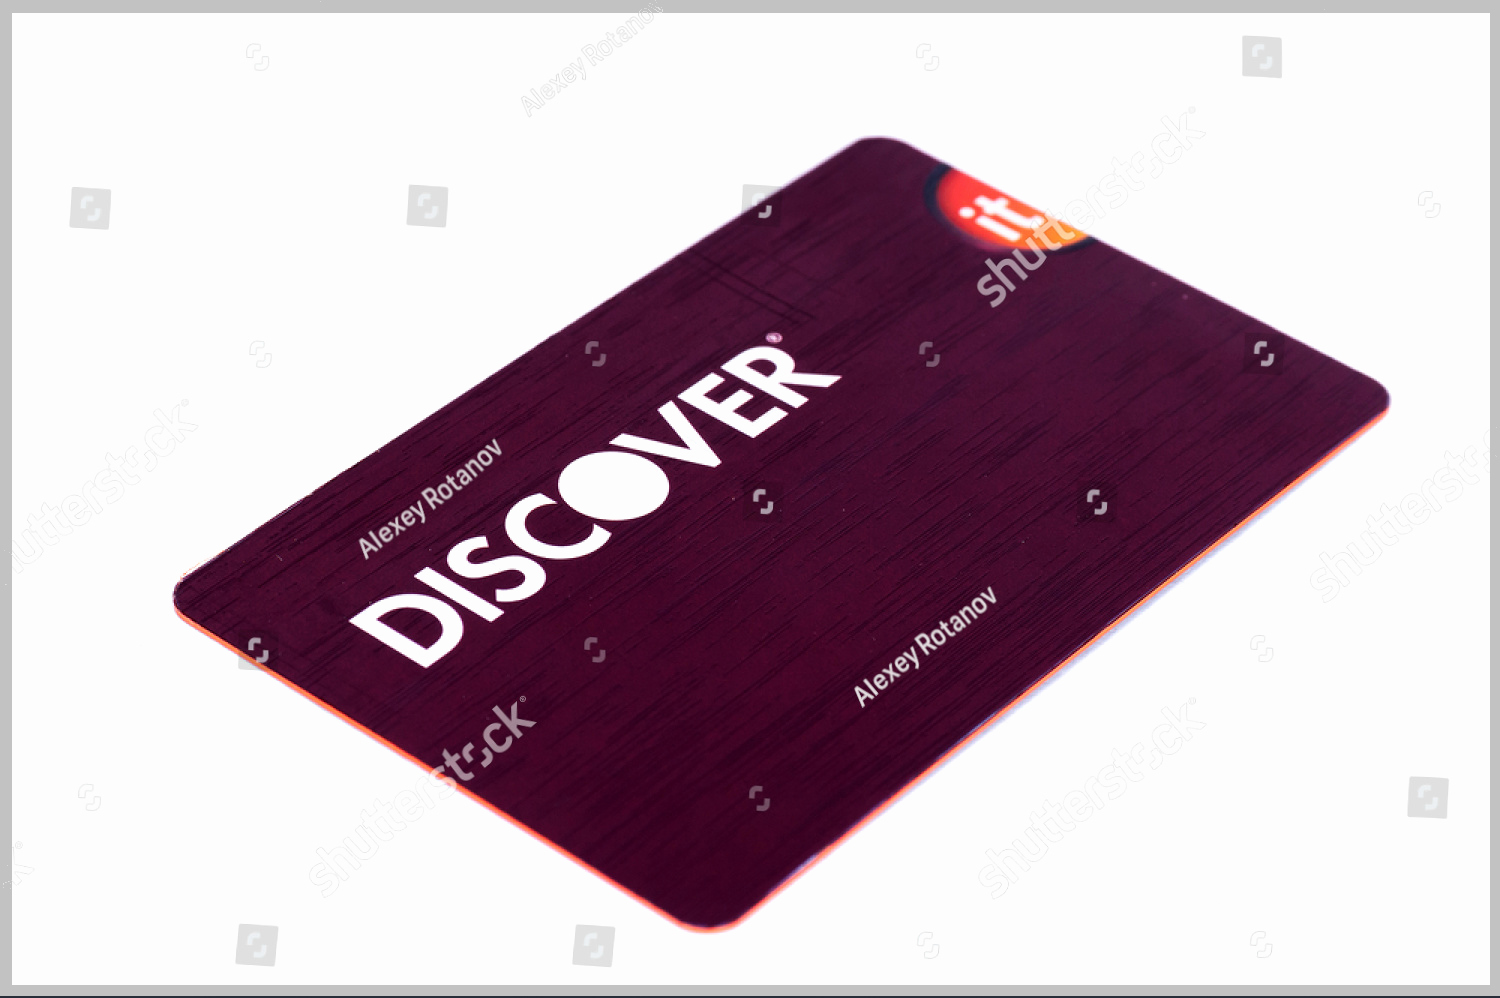 Discover It Card Designs New 8 Discover Card Designs